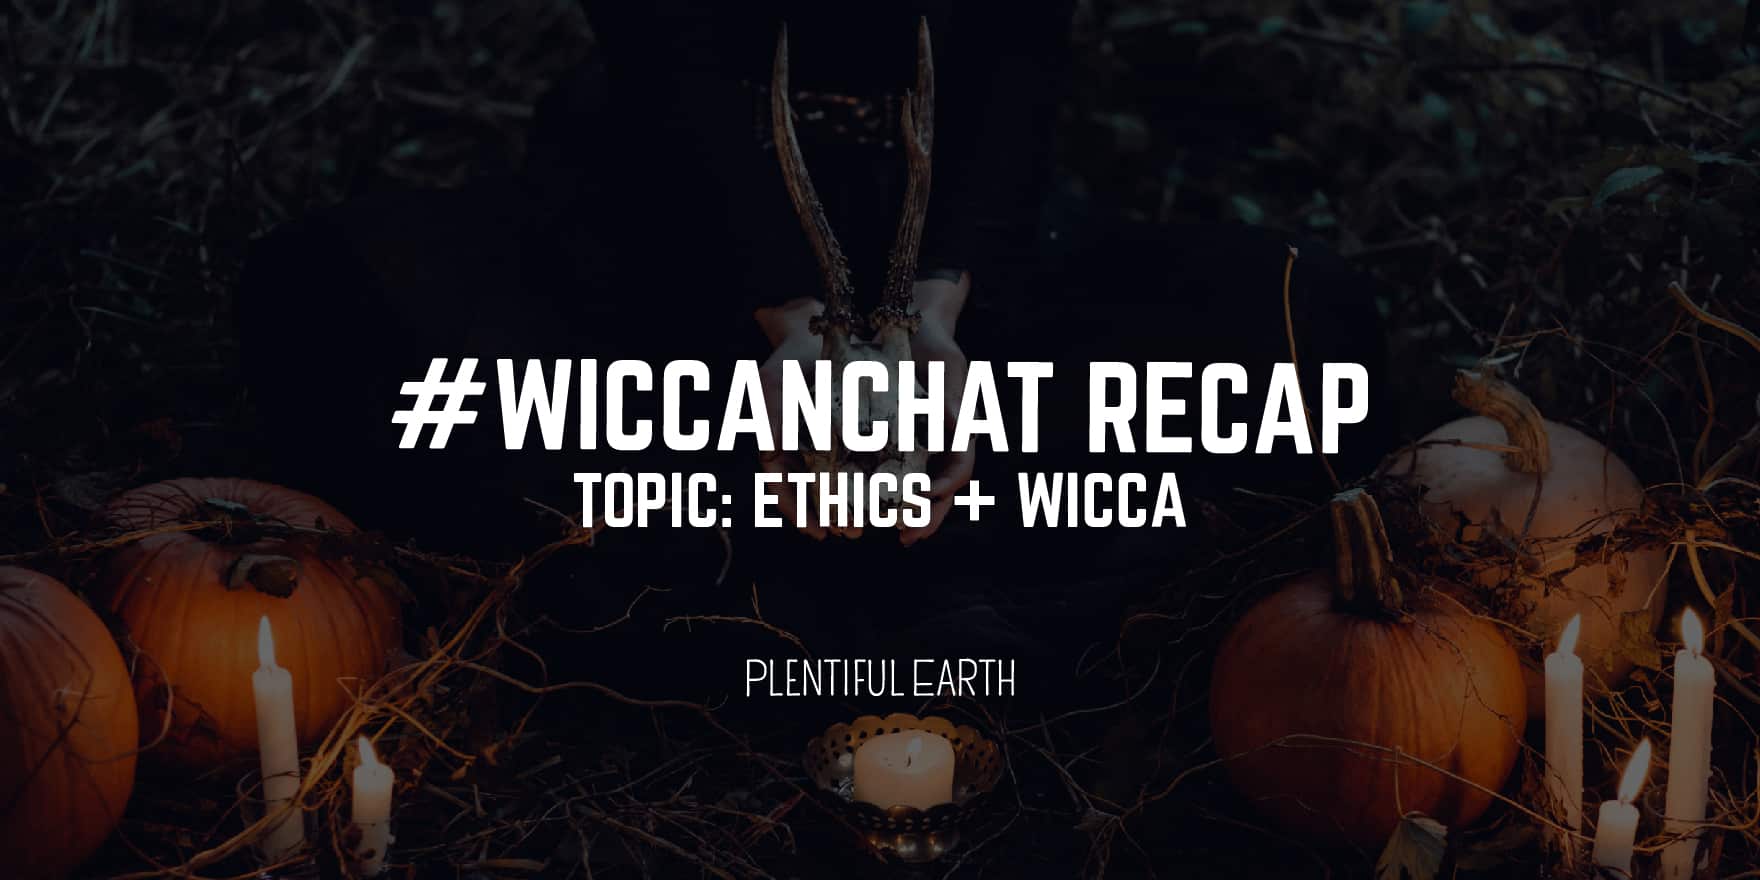 A serene and mystical setting with candles and pumpkins, highlighting a conversation on the theme of "ethics + wicca" under the hashtag #wiccanchat in a spiritual atmosphere.